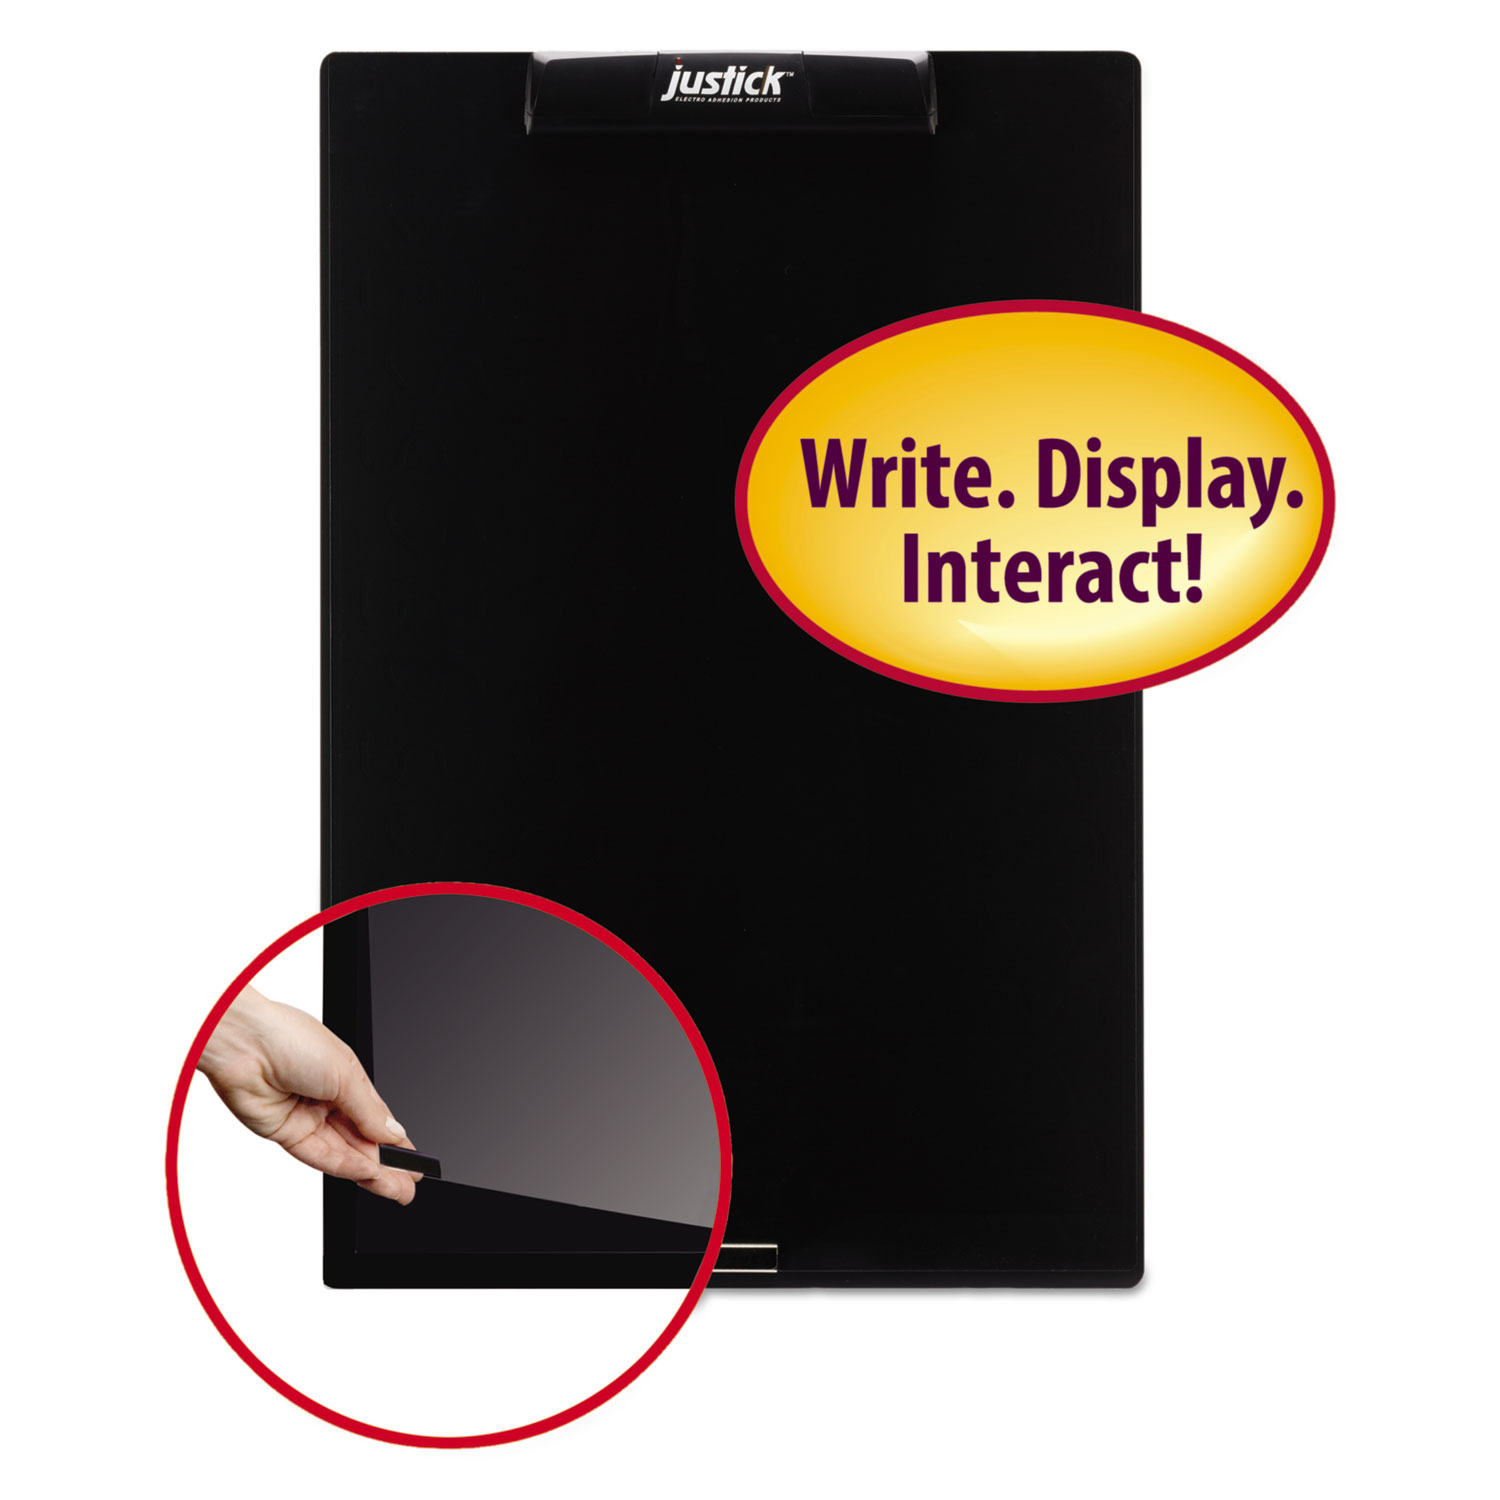  Smead 02545 Justick Frameless Electro-Surface Dry-Erase Board w/Clear Overlay, 16 x 24, BK (SMD02545) 